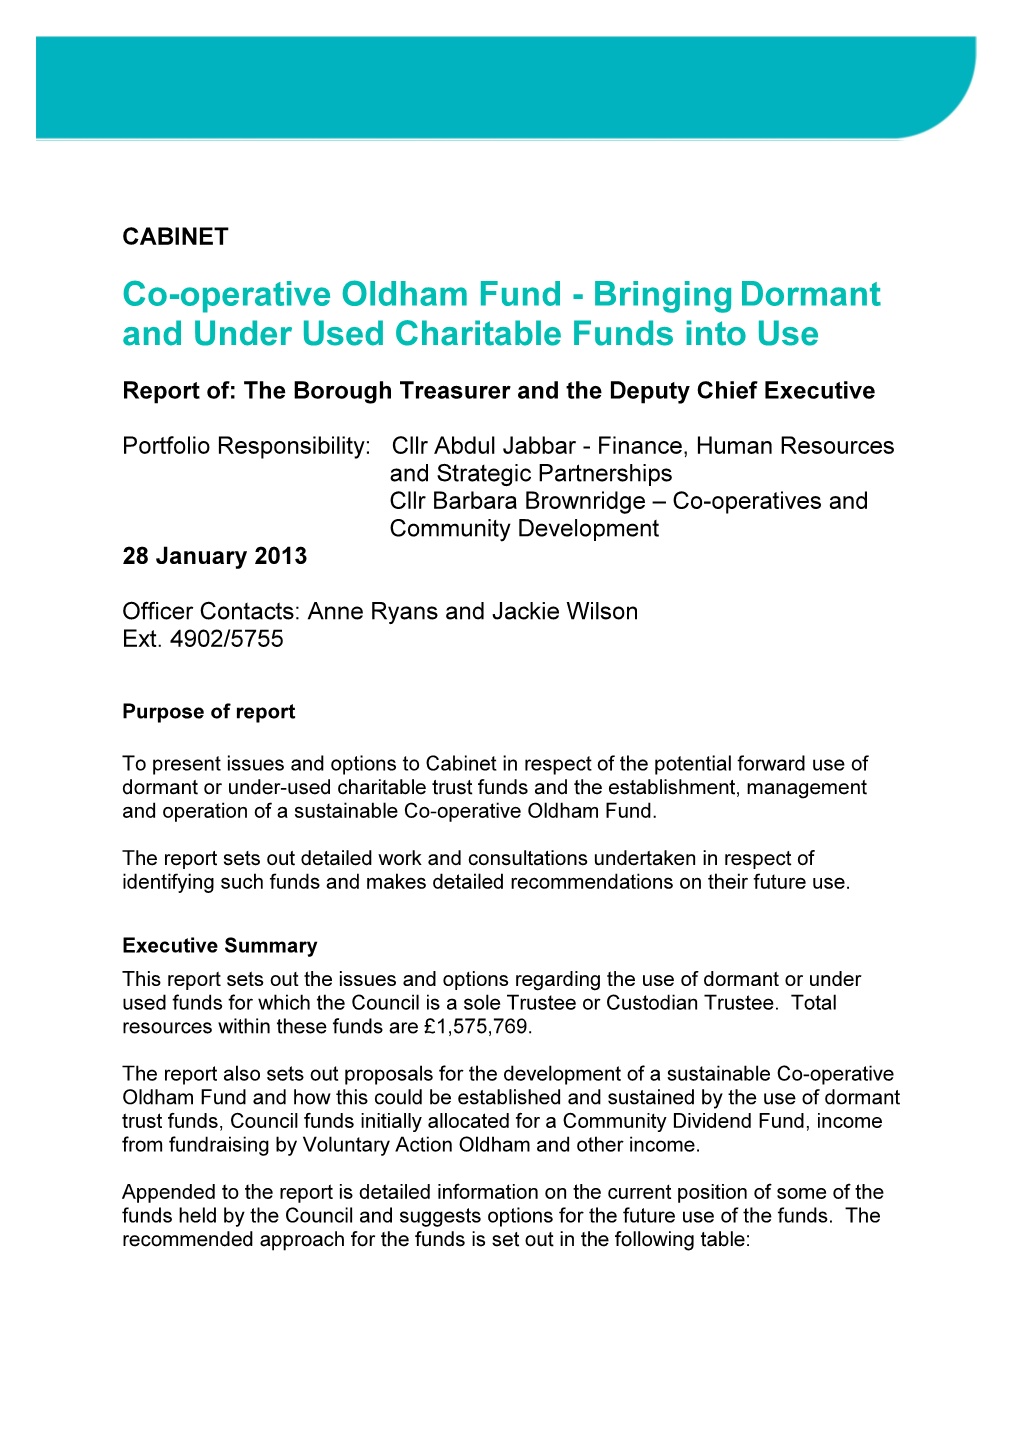 Co-Operative Oldham Fund - Bringing Dormant and Under Used Charitable Funds Into Use